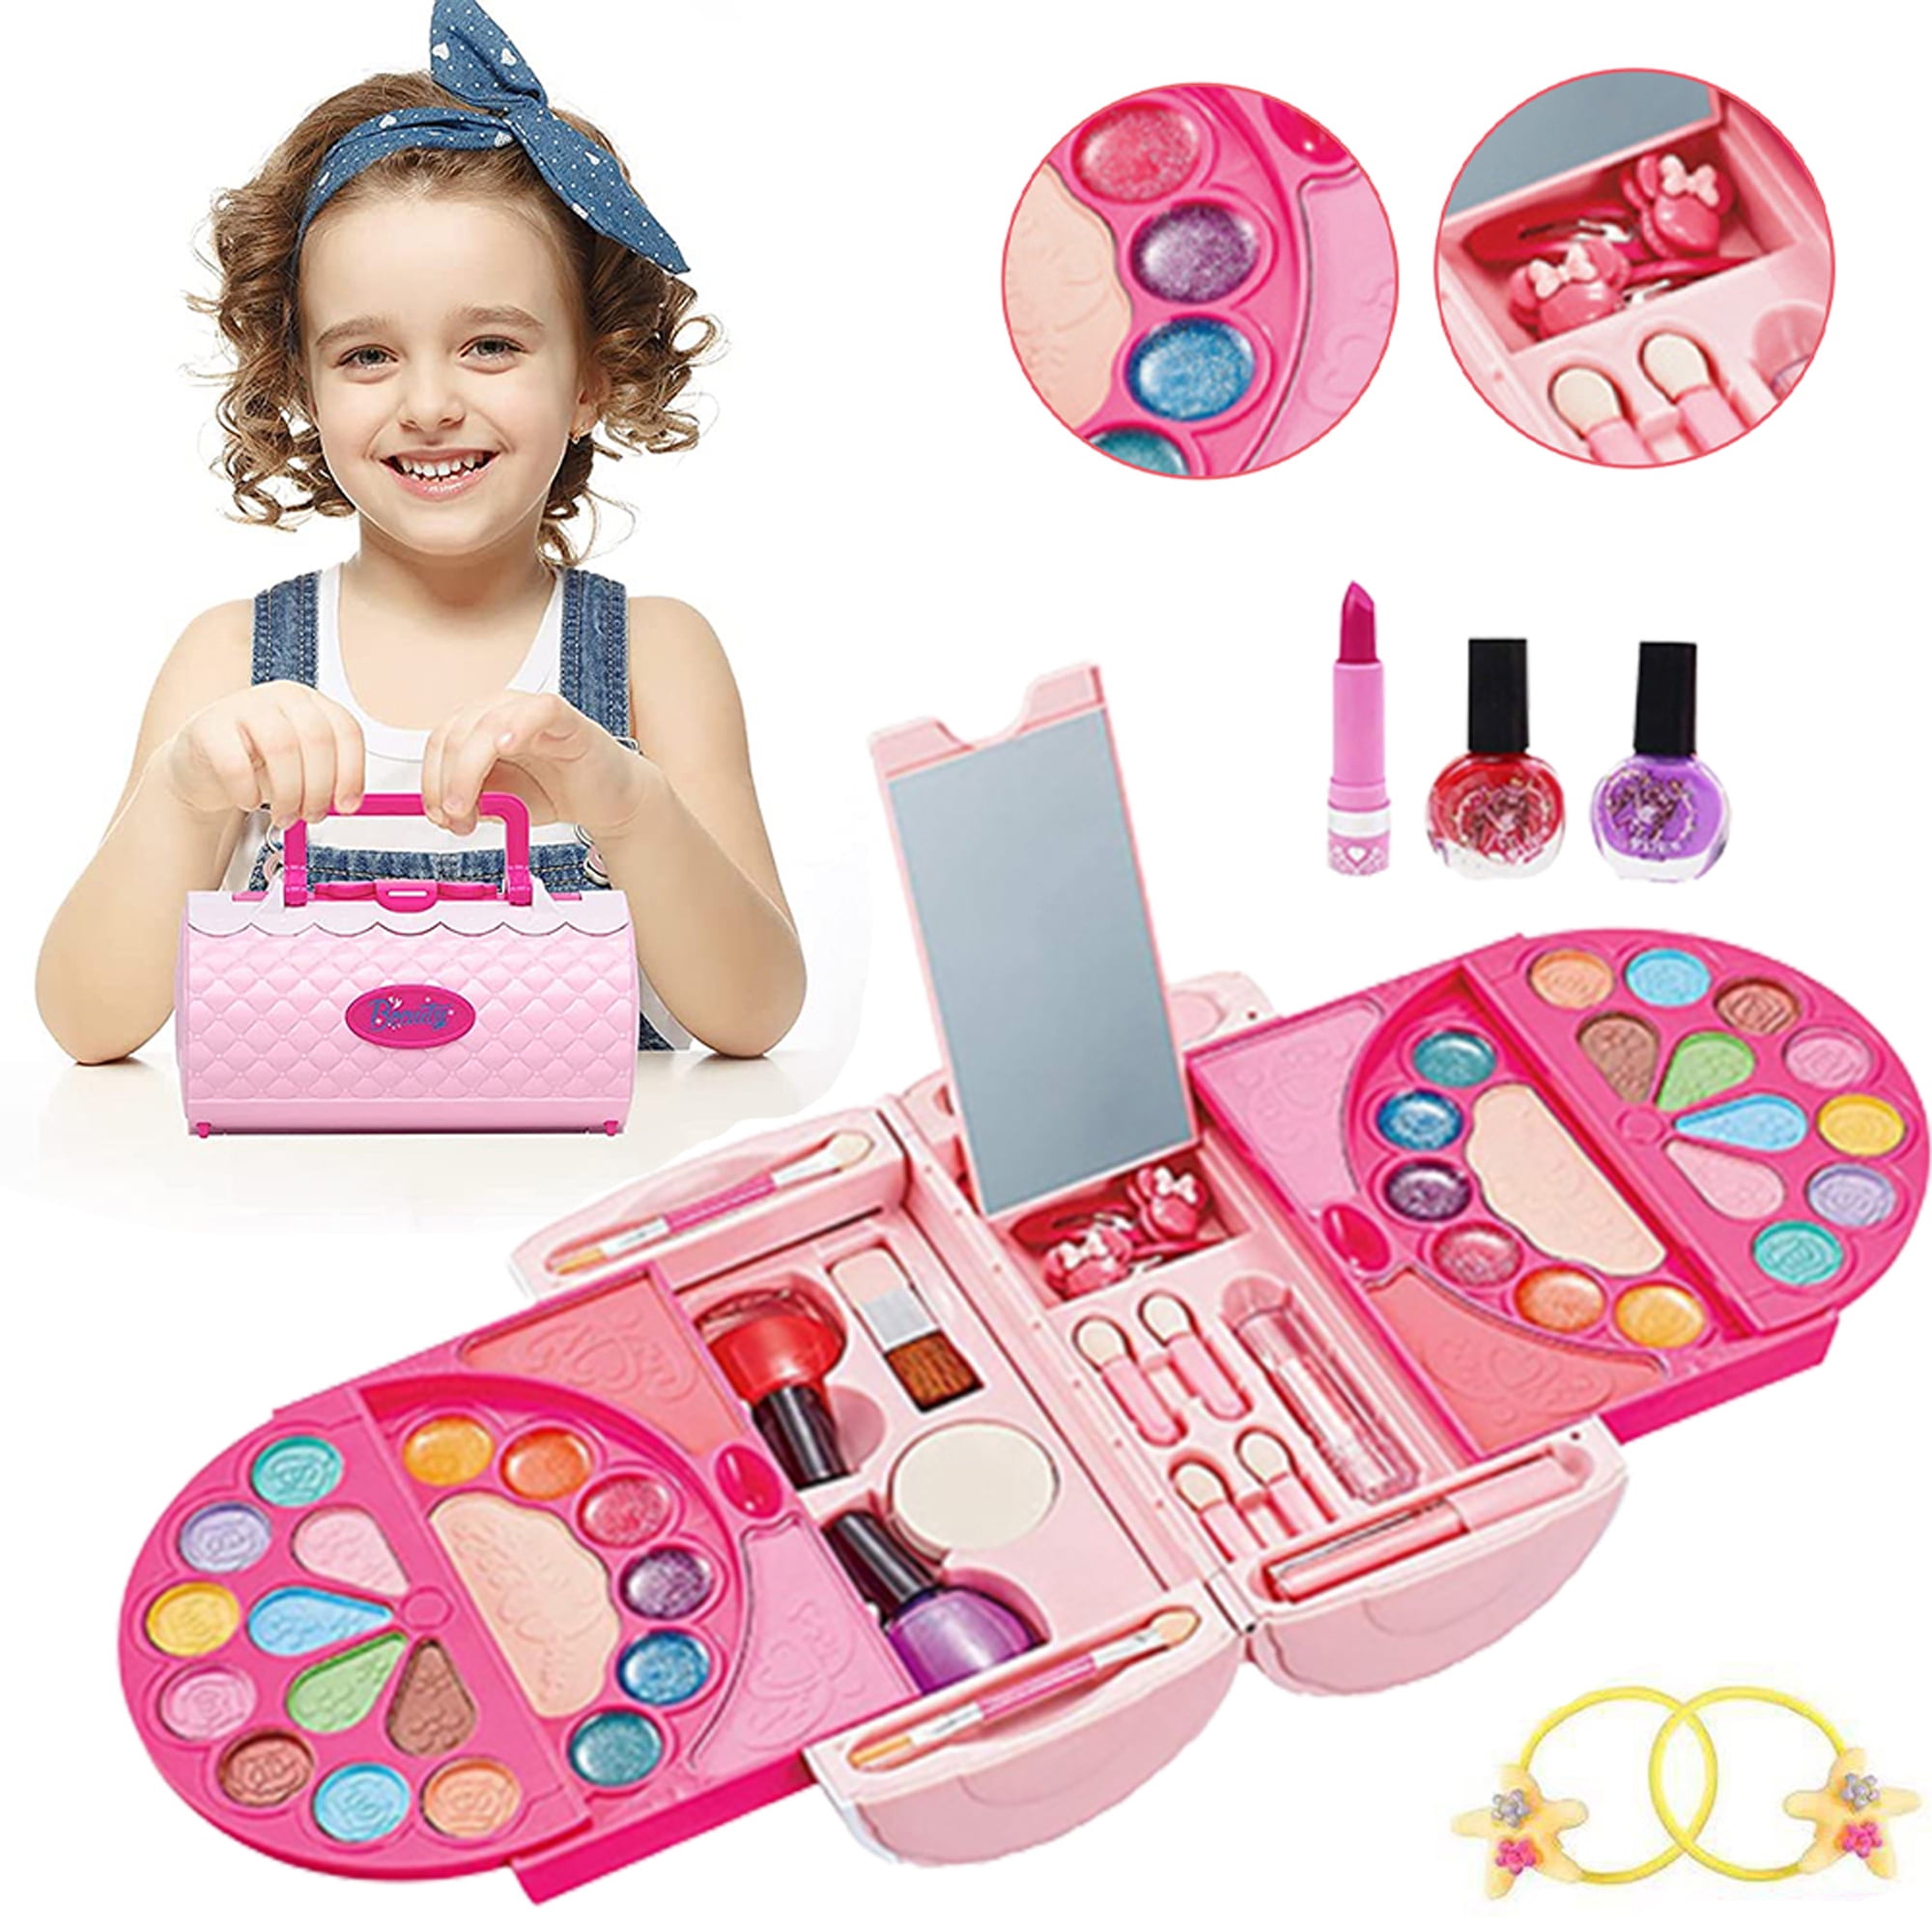 Caboodles On-The-Go Girl Makeup Box, Silver Sparkle